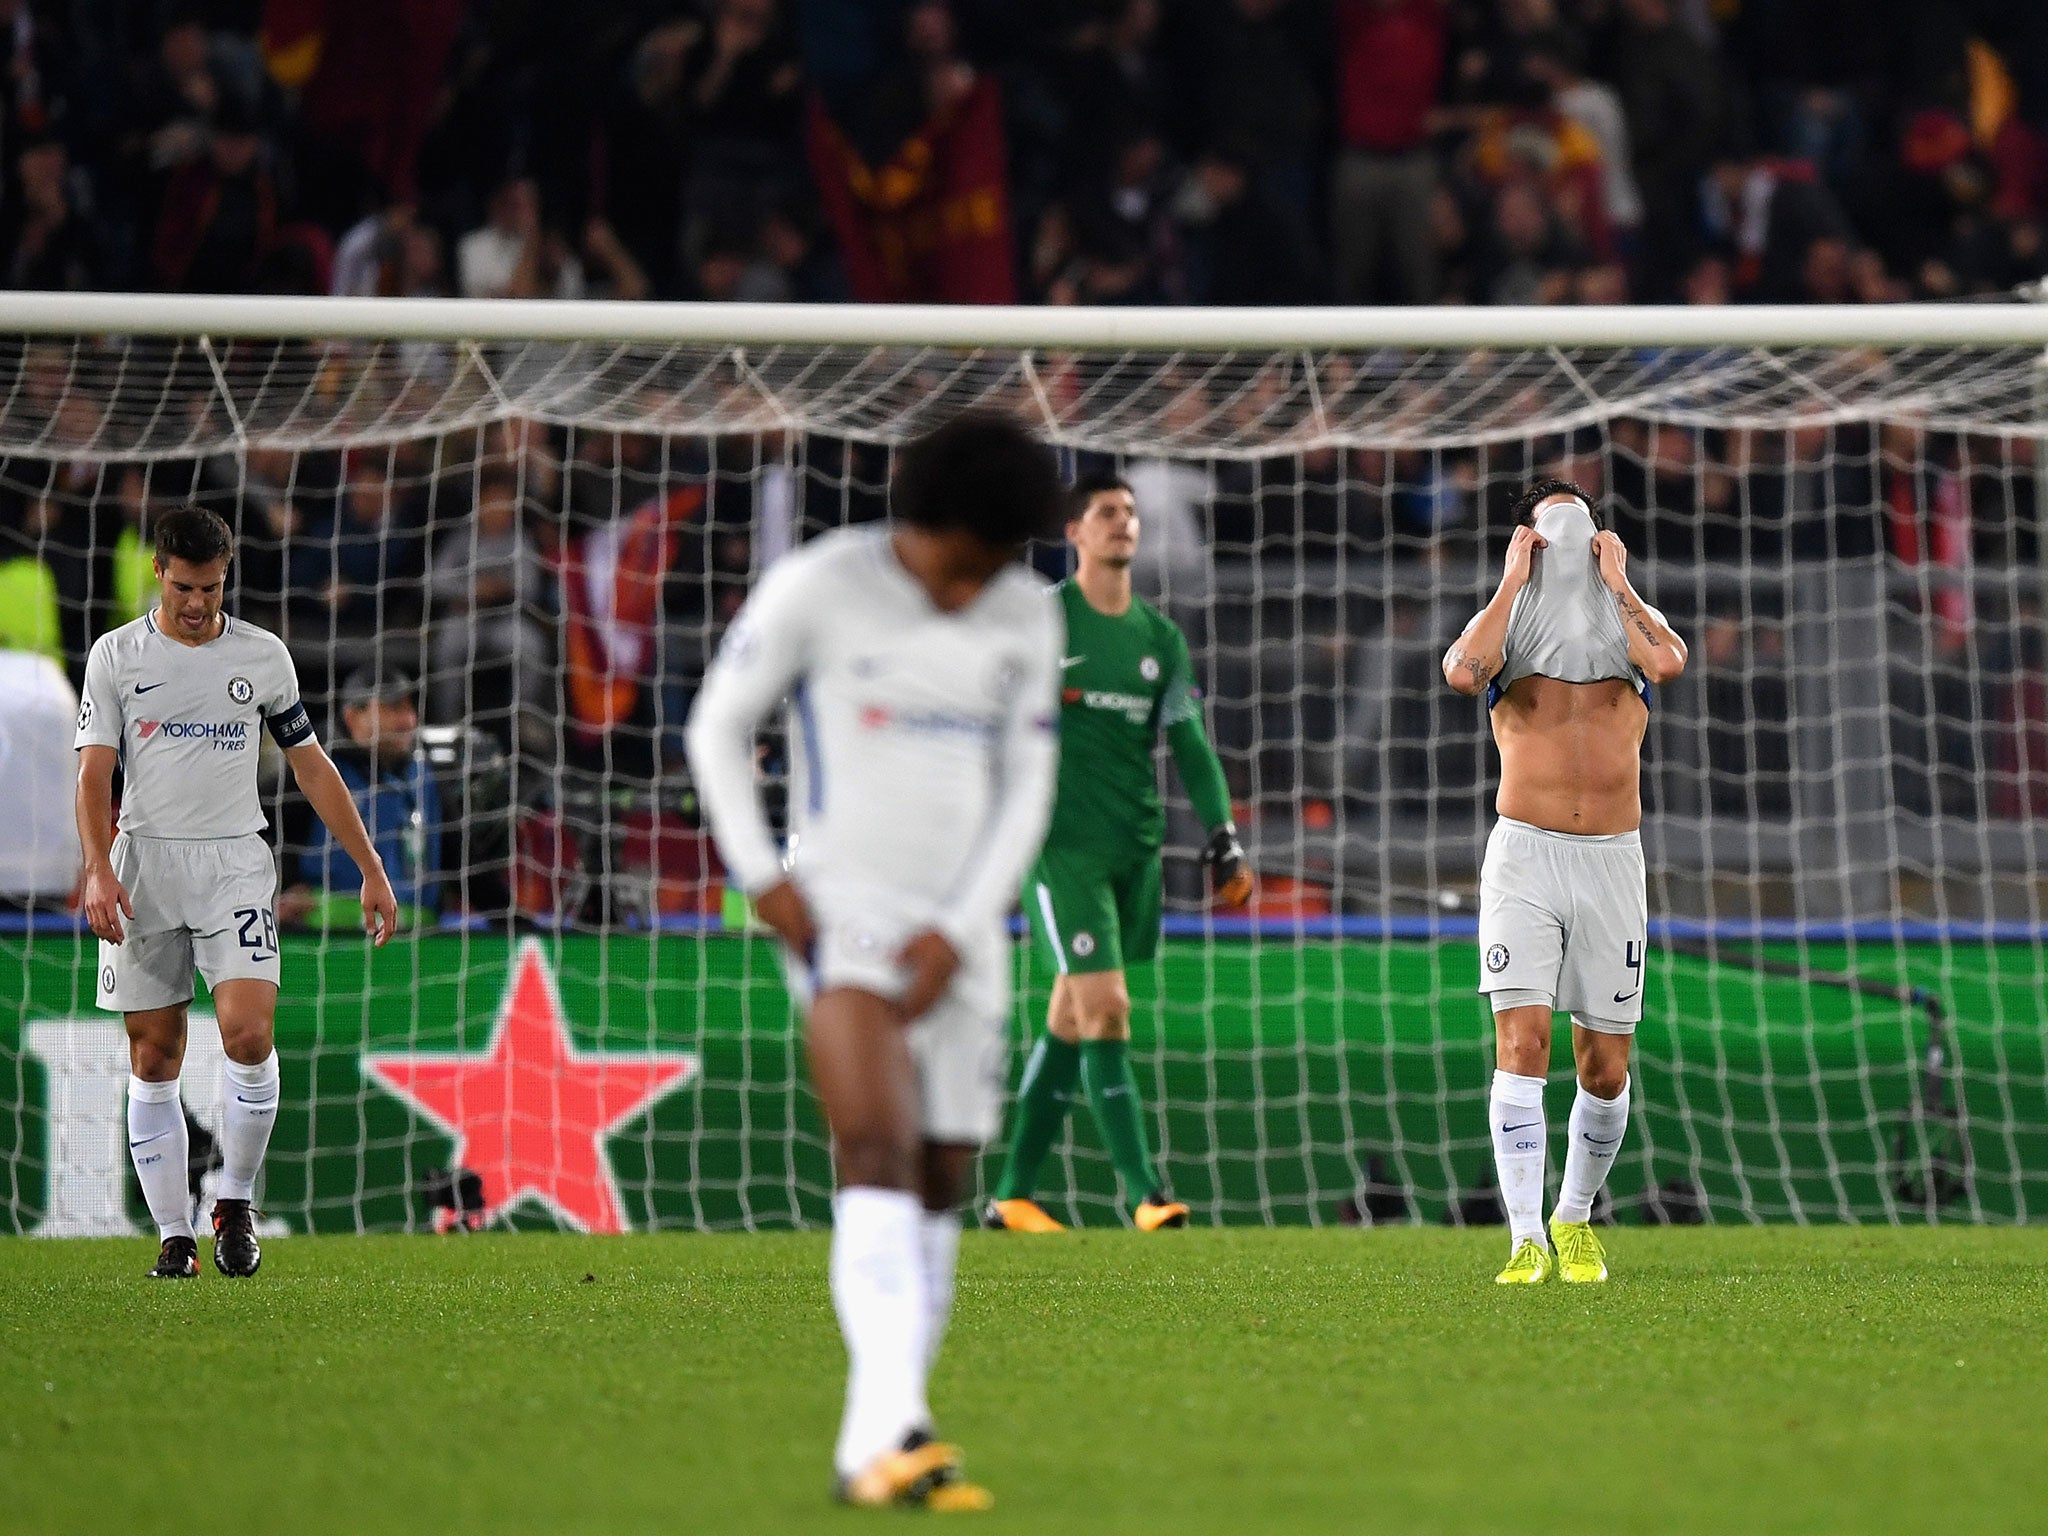 Chelsea's players react after conceding their third goal of the night